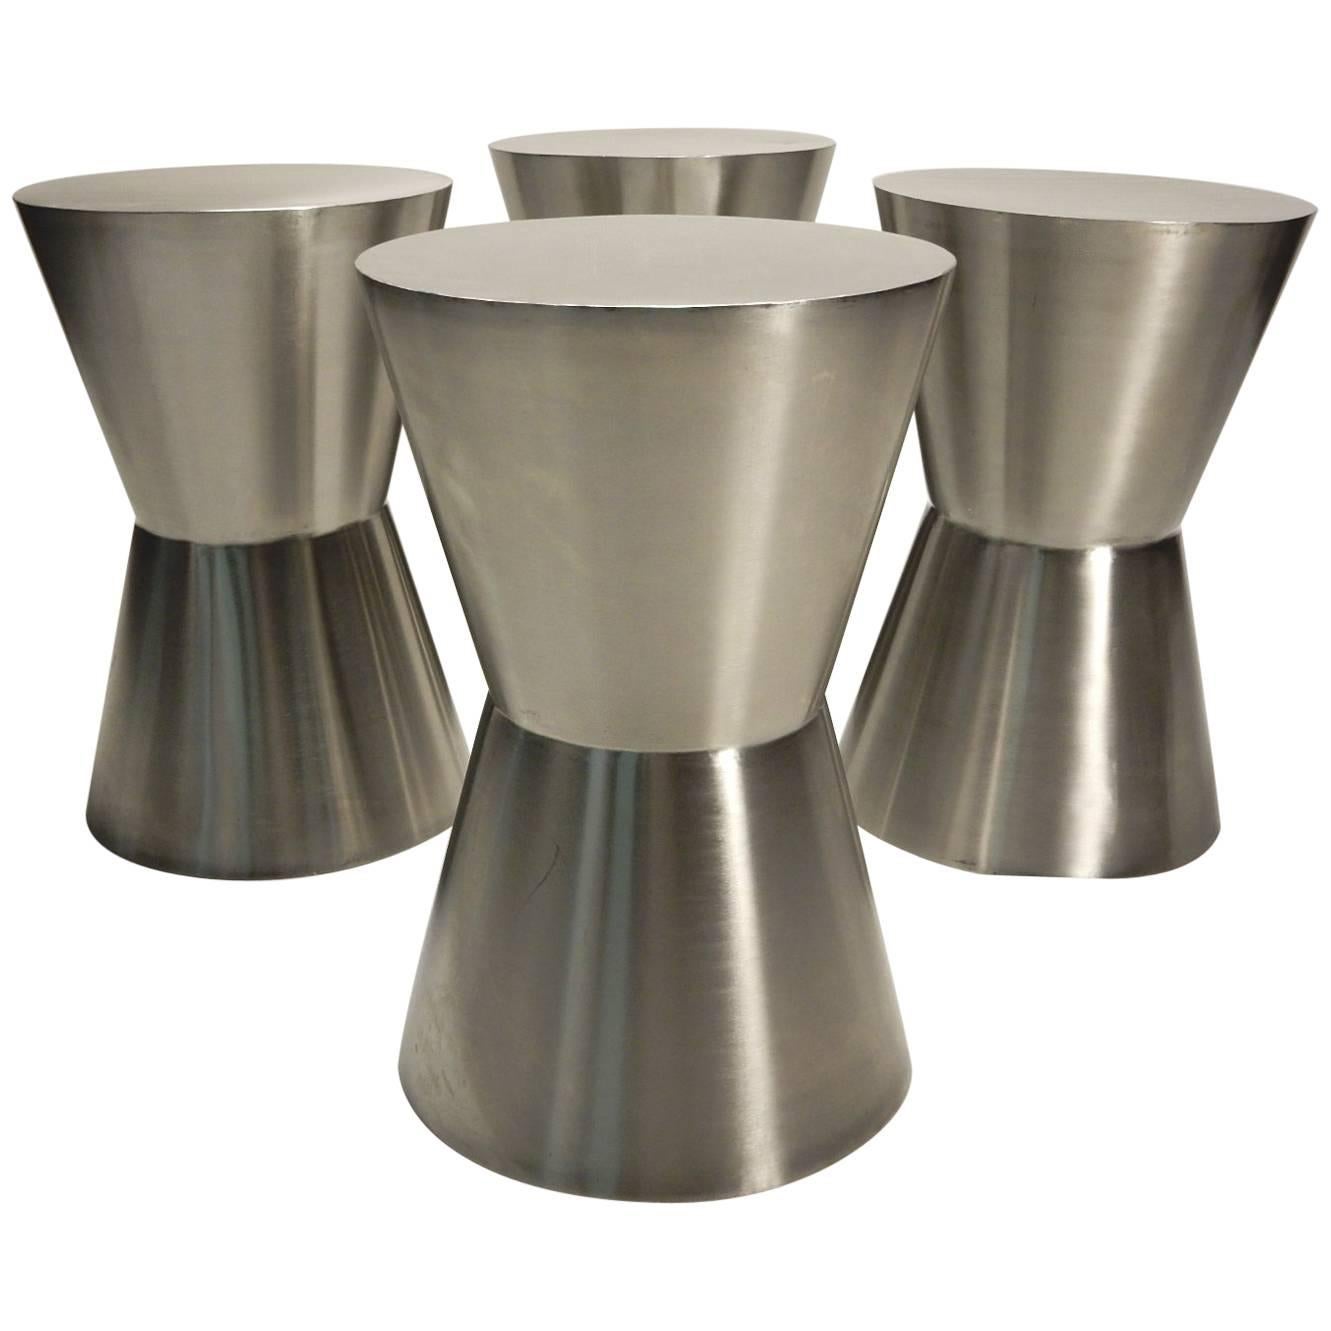 Four Stainless Steel Hourglass Sculptural Stools or Tables